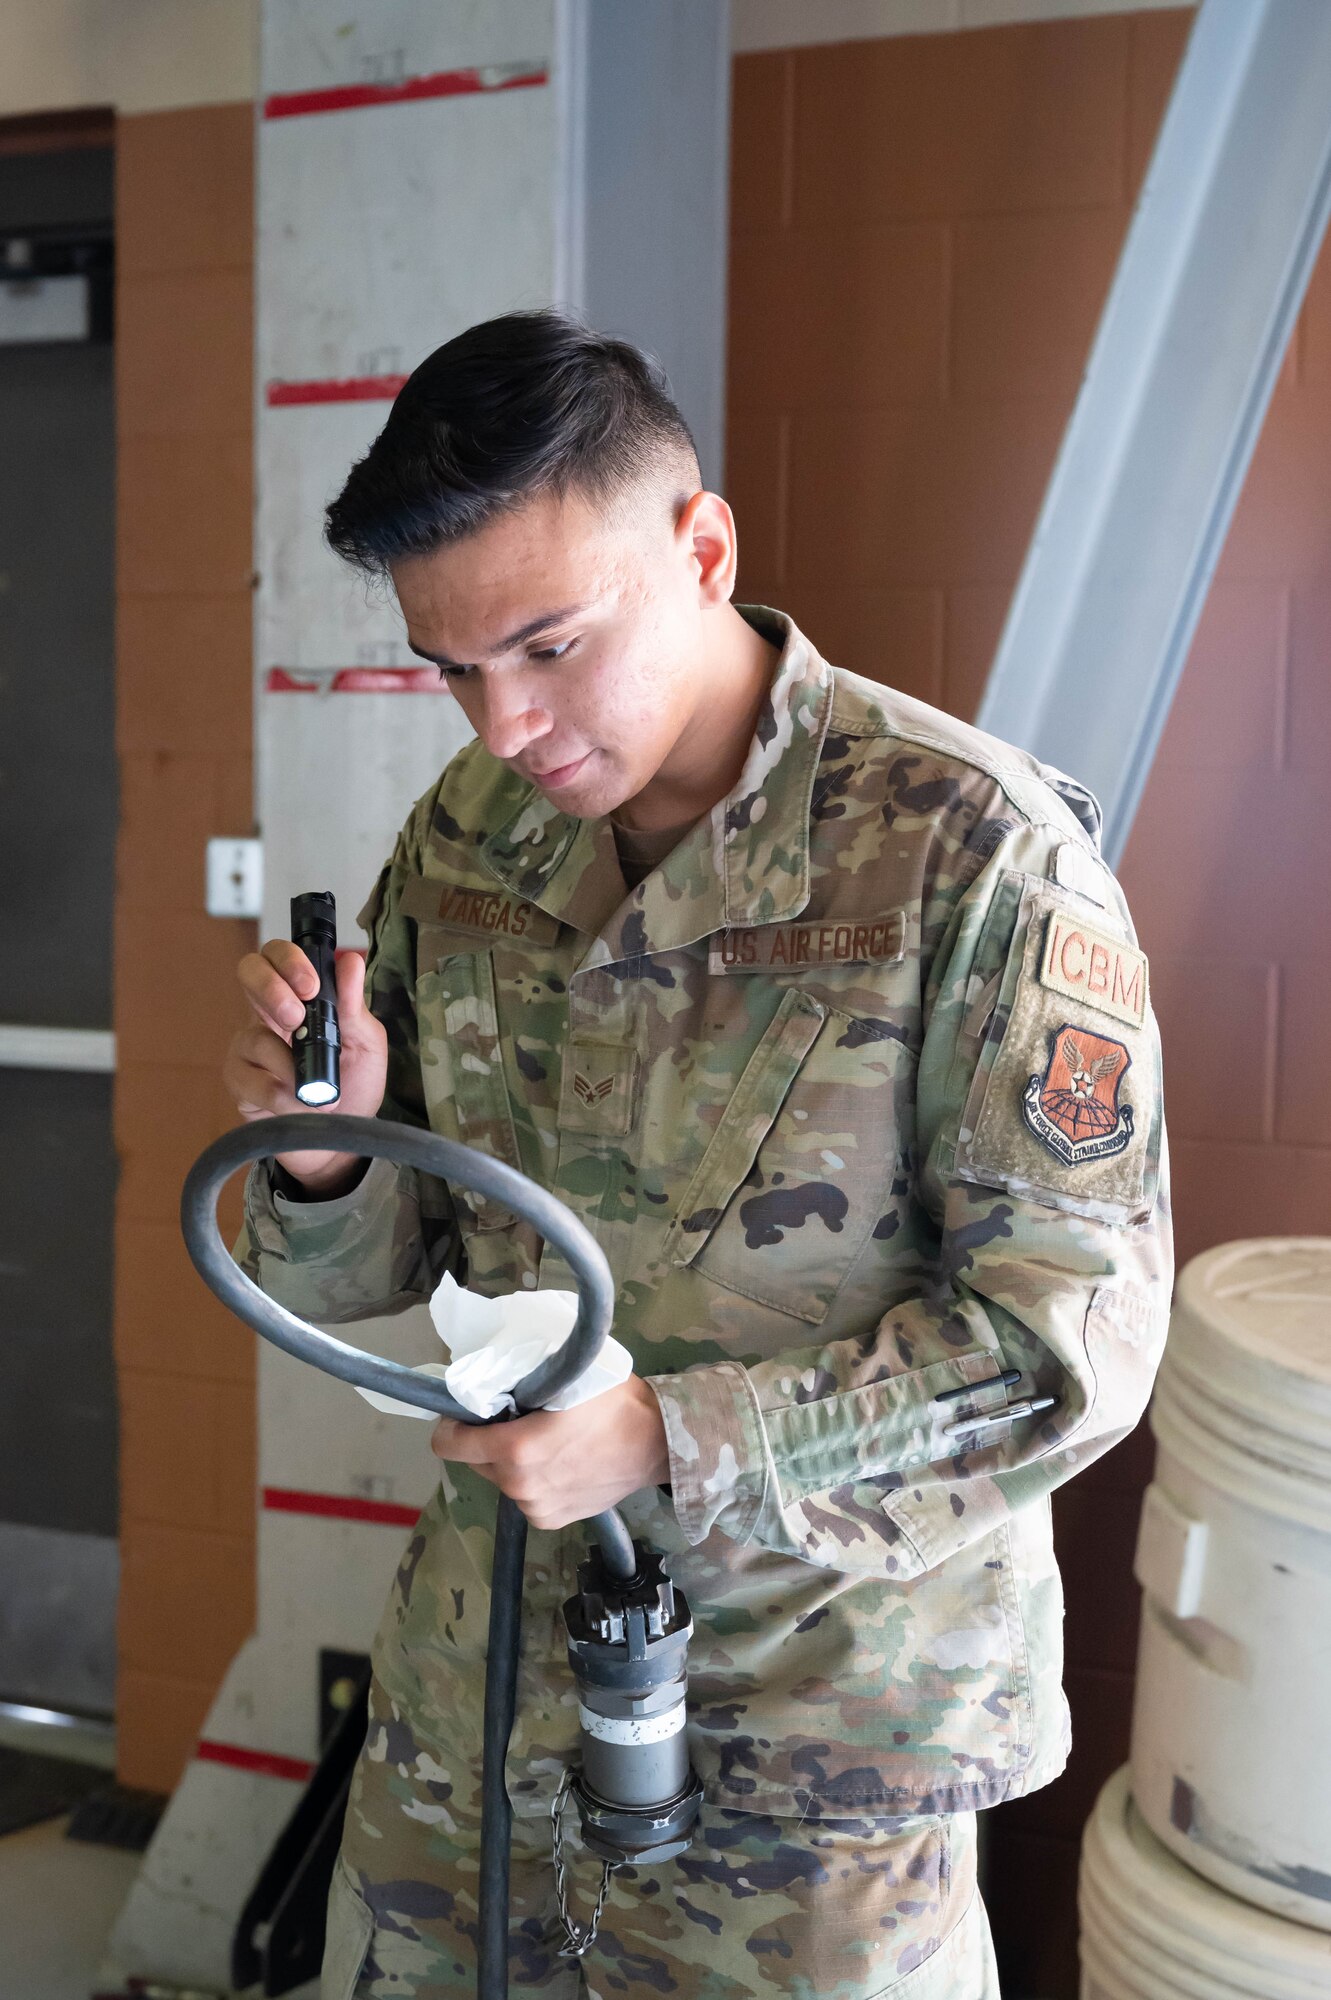 Senior Airman Joseph Vargas, 741st Maintenance Squadron mechanical and pneudraulics technician, inspects a component of a hydraulic actuator power unit July 28, 2021, at Malmstrom Air Force Base, Mont.